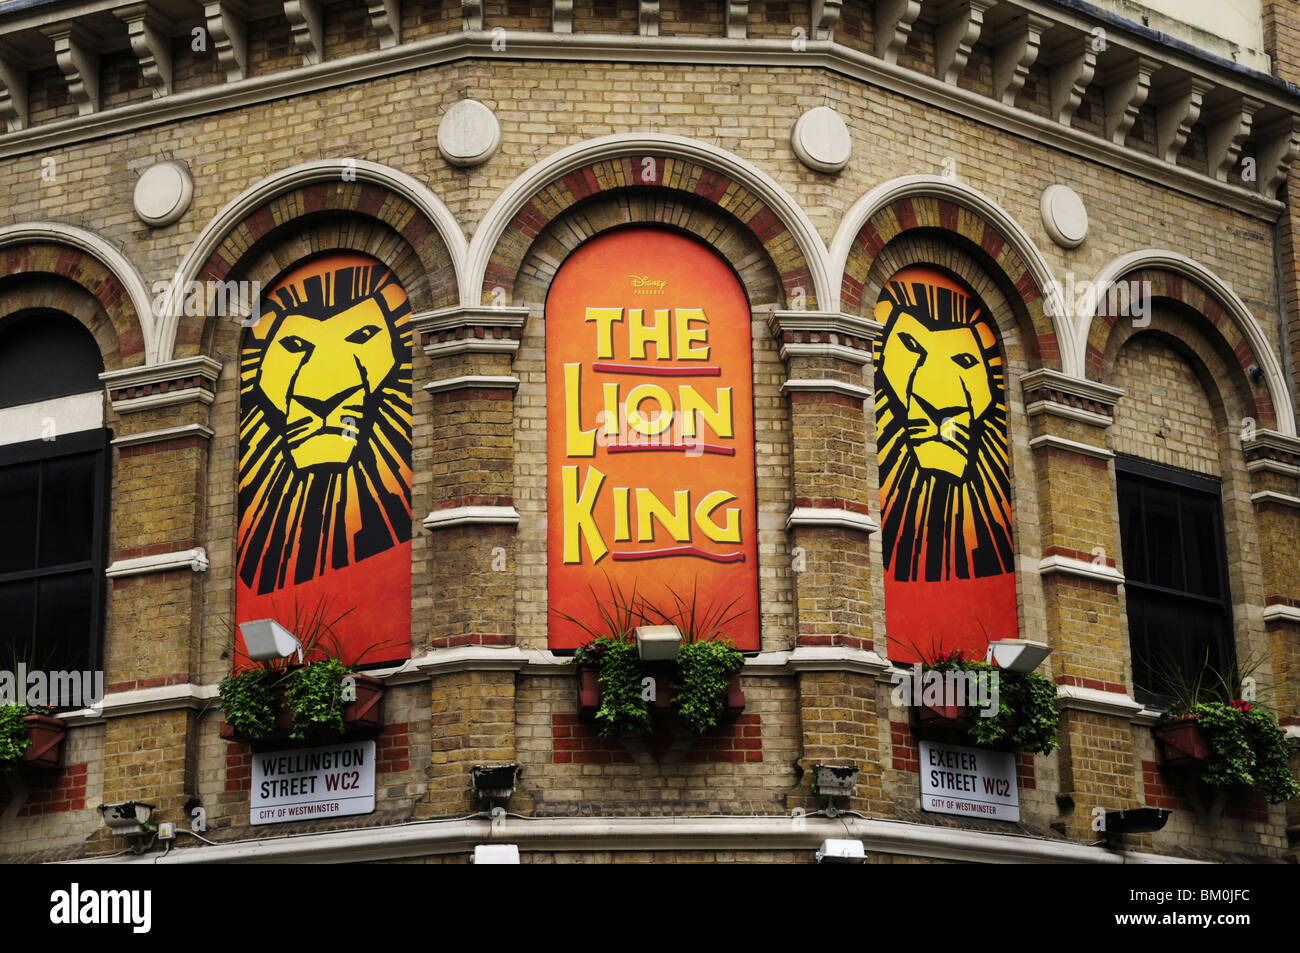 The Lion King Billboards at the Lyceum Theatre, Covent Garden, London, England, UK Stock Photo